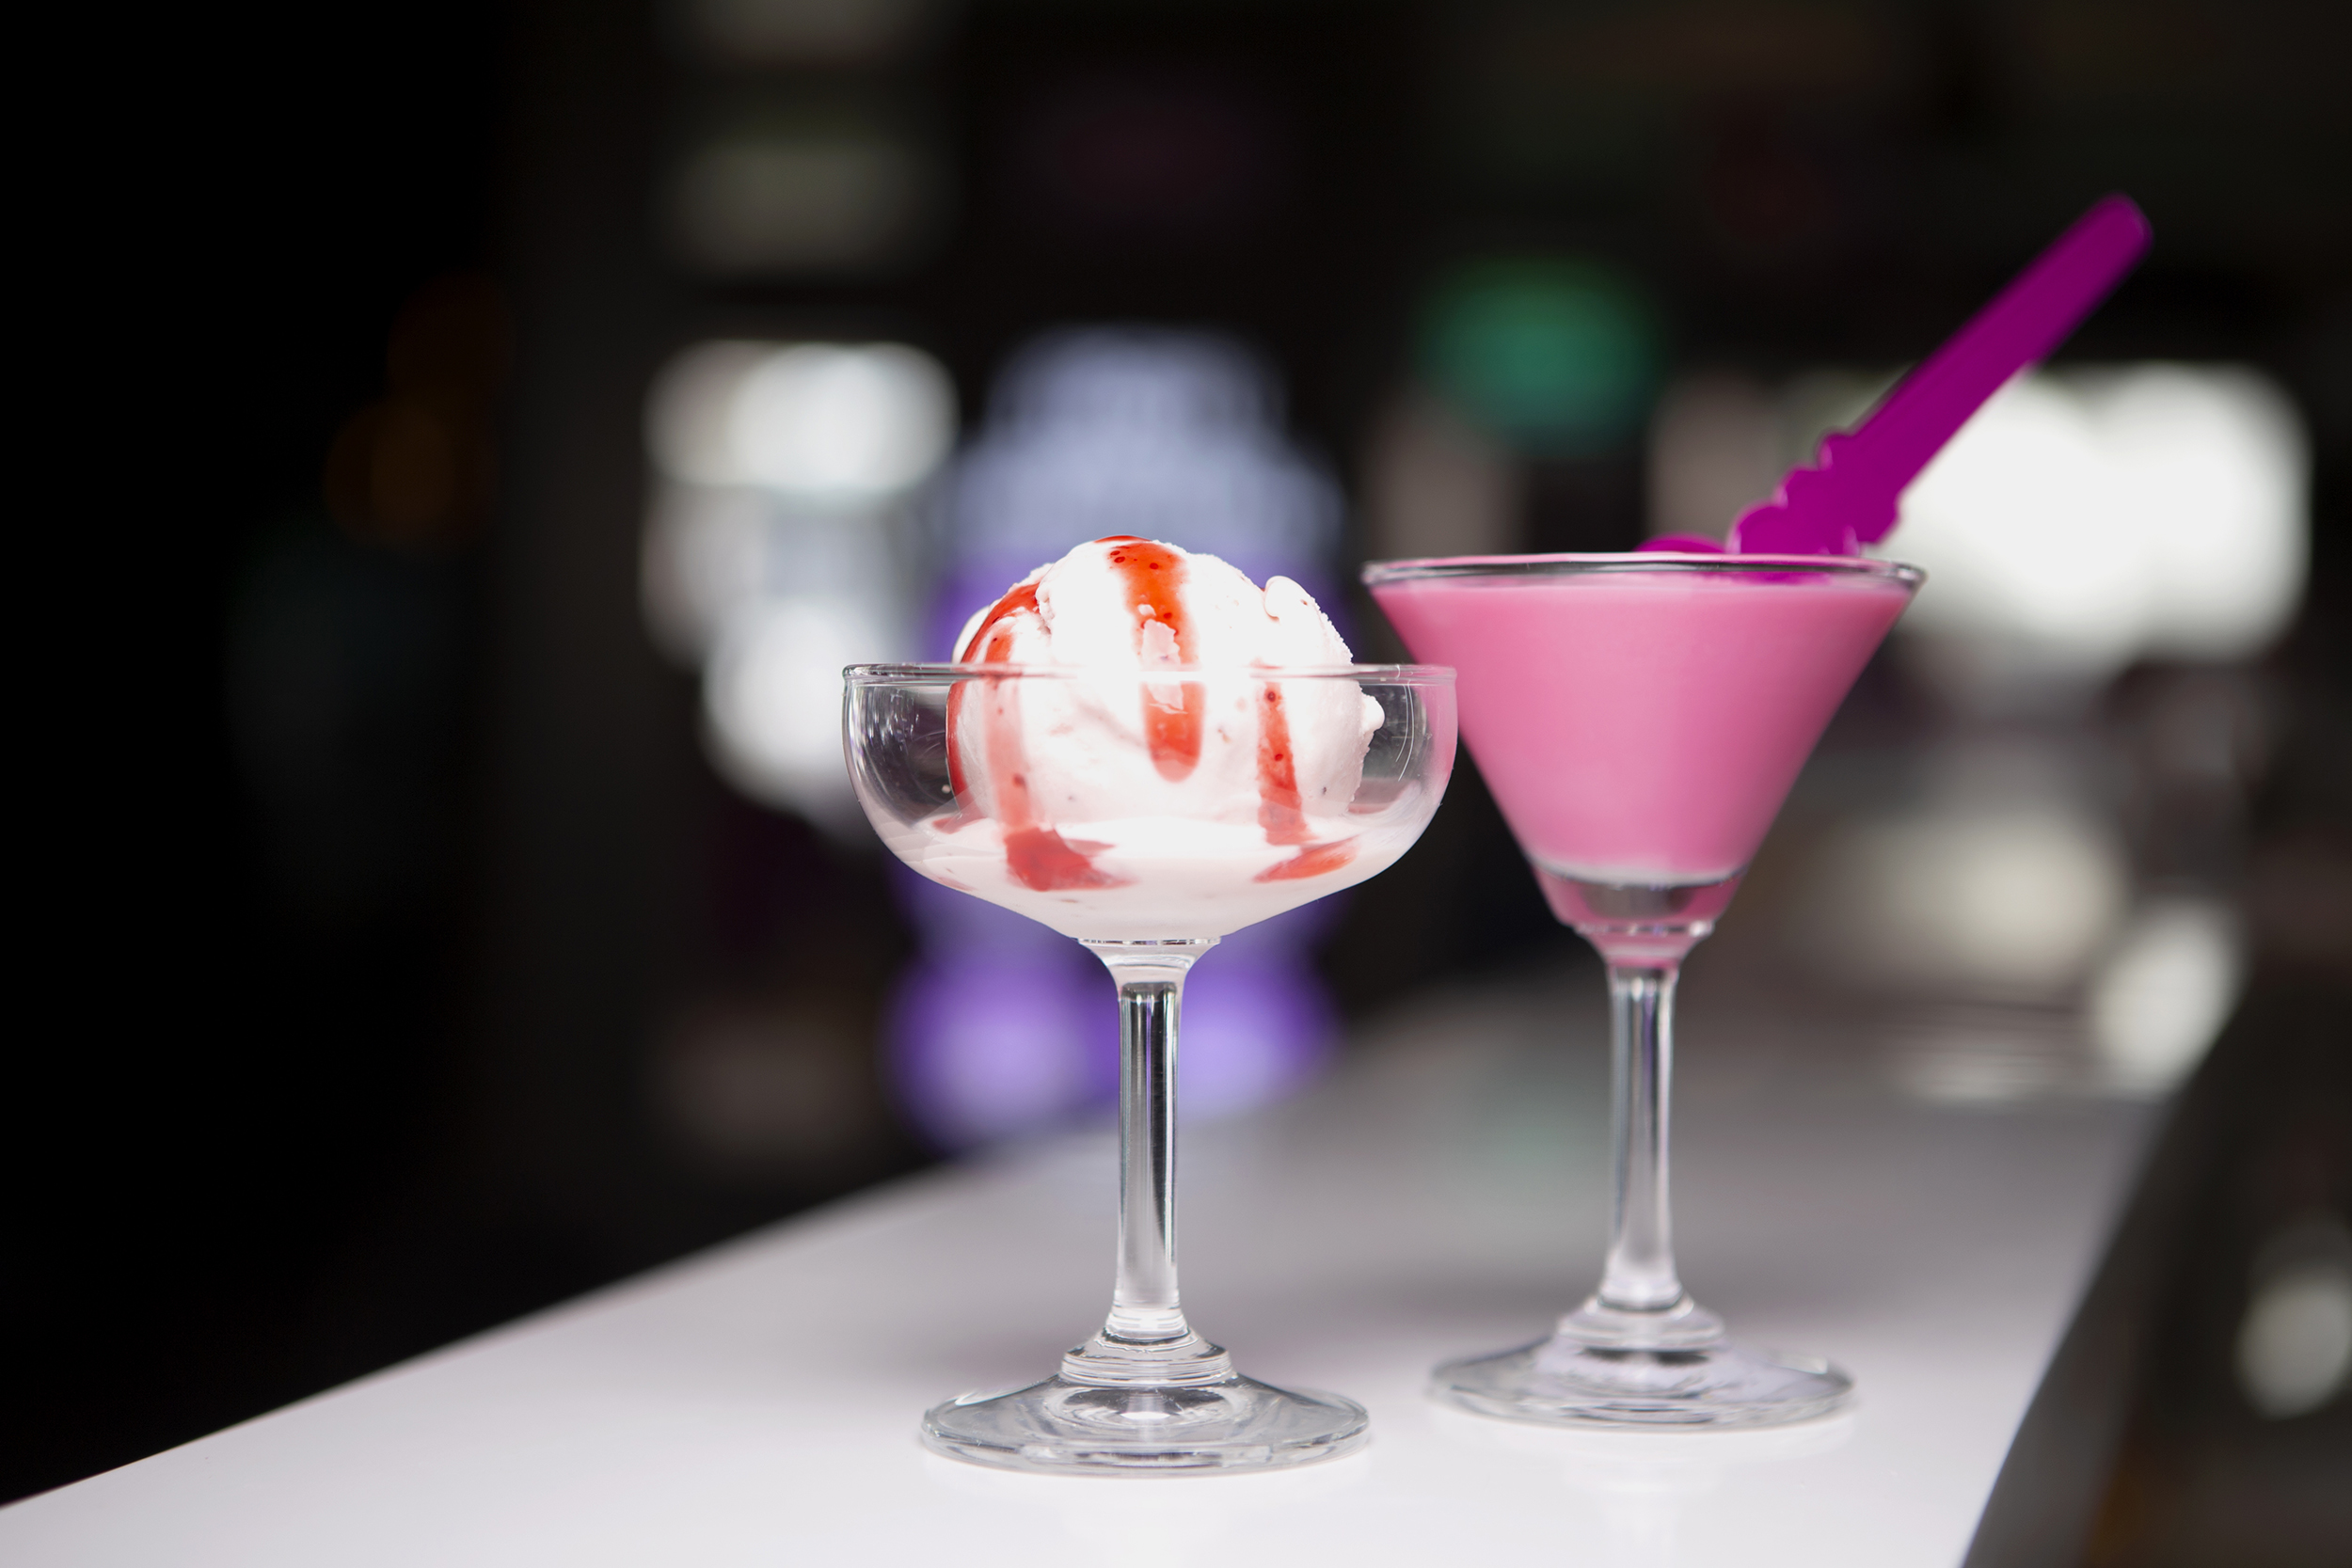 A scoop of vanilla gelato in a glass next to a pink-colored cocktail.